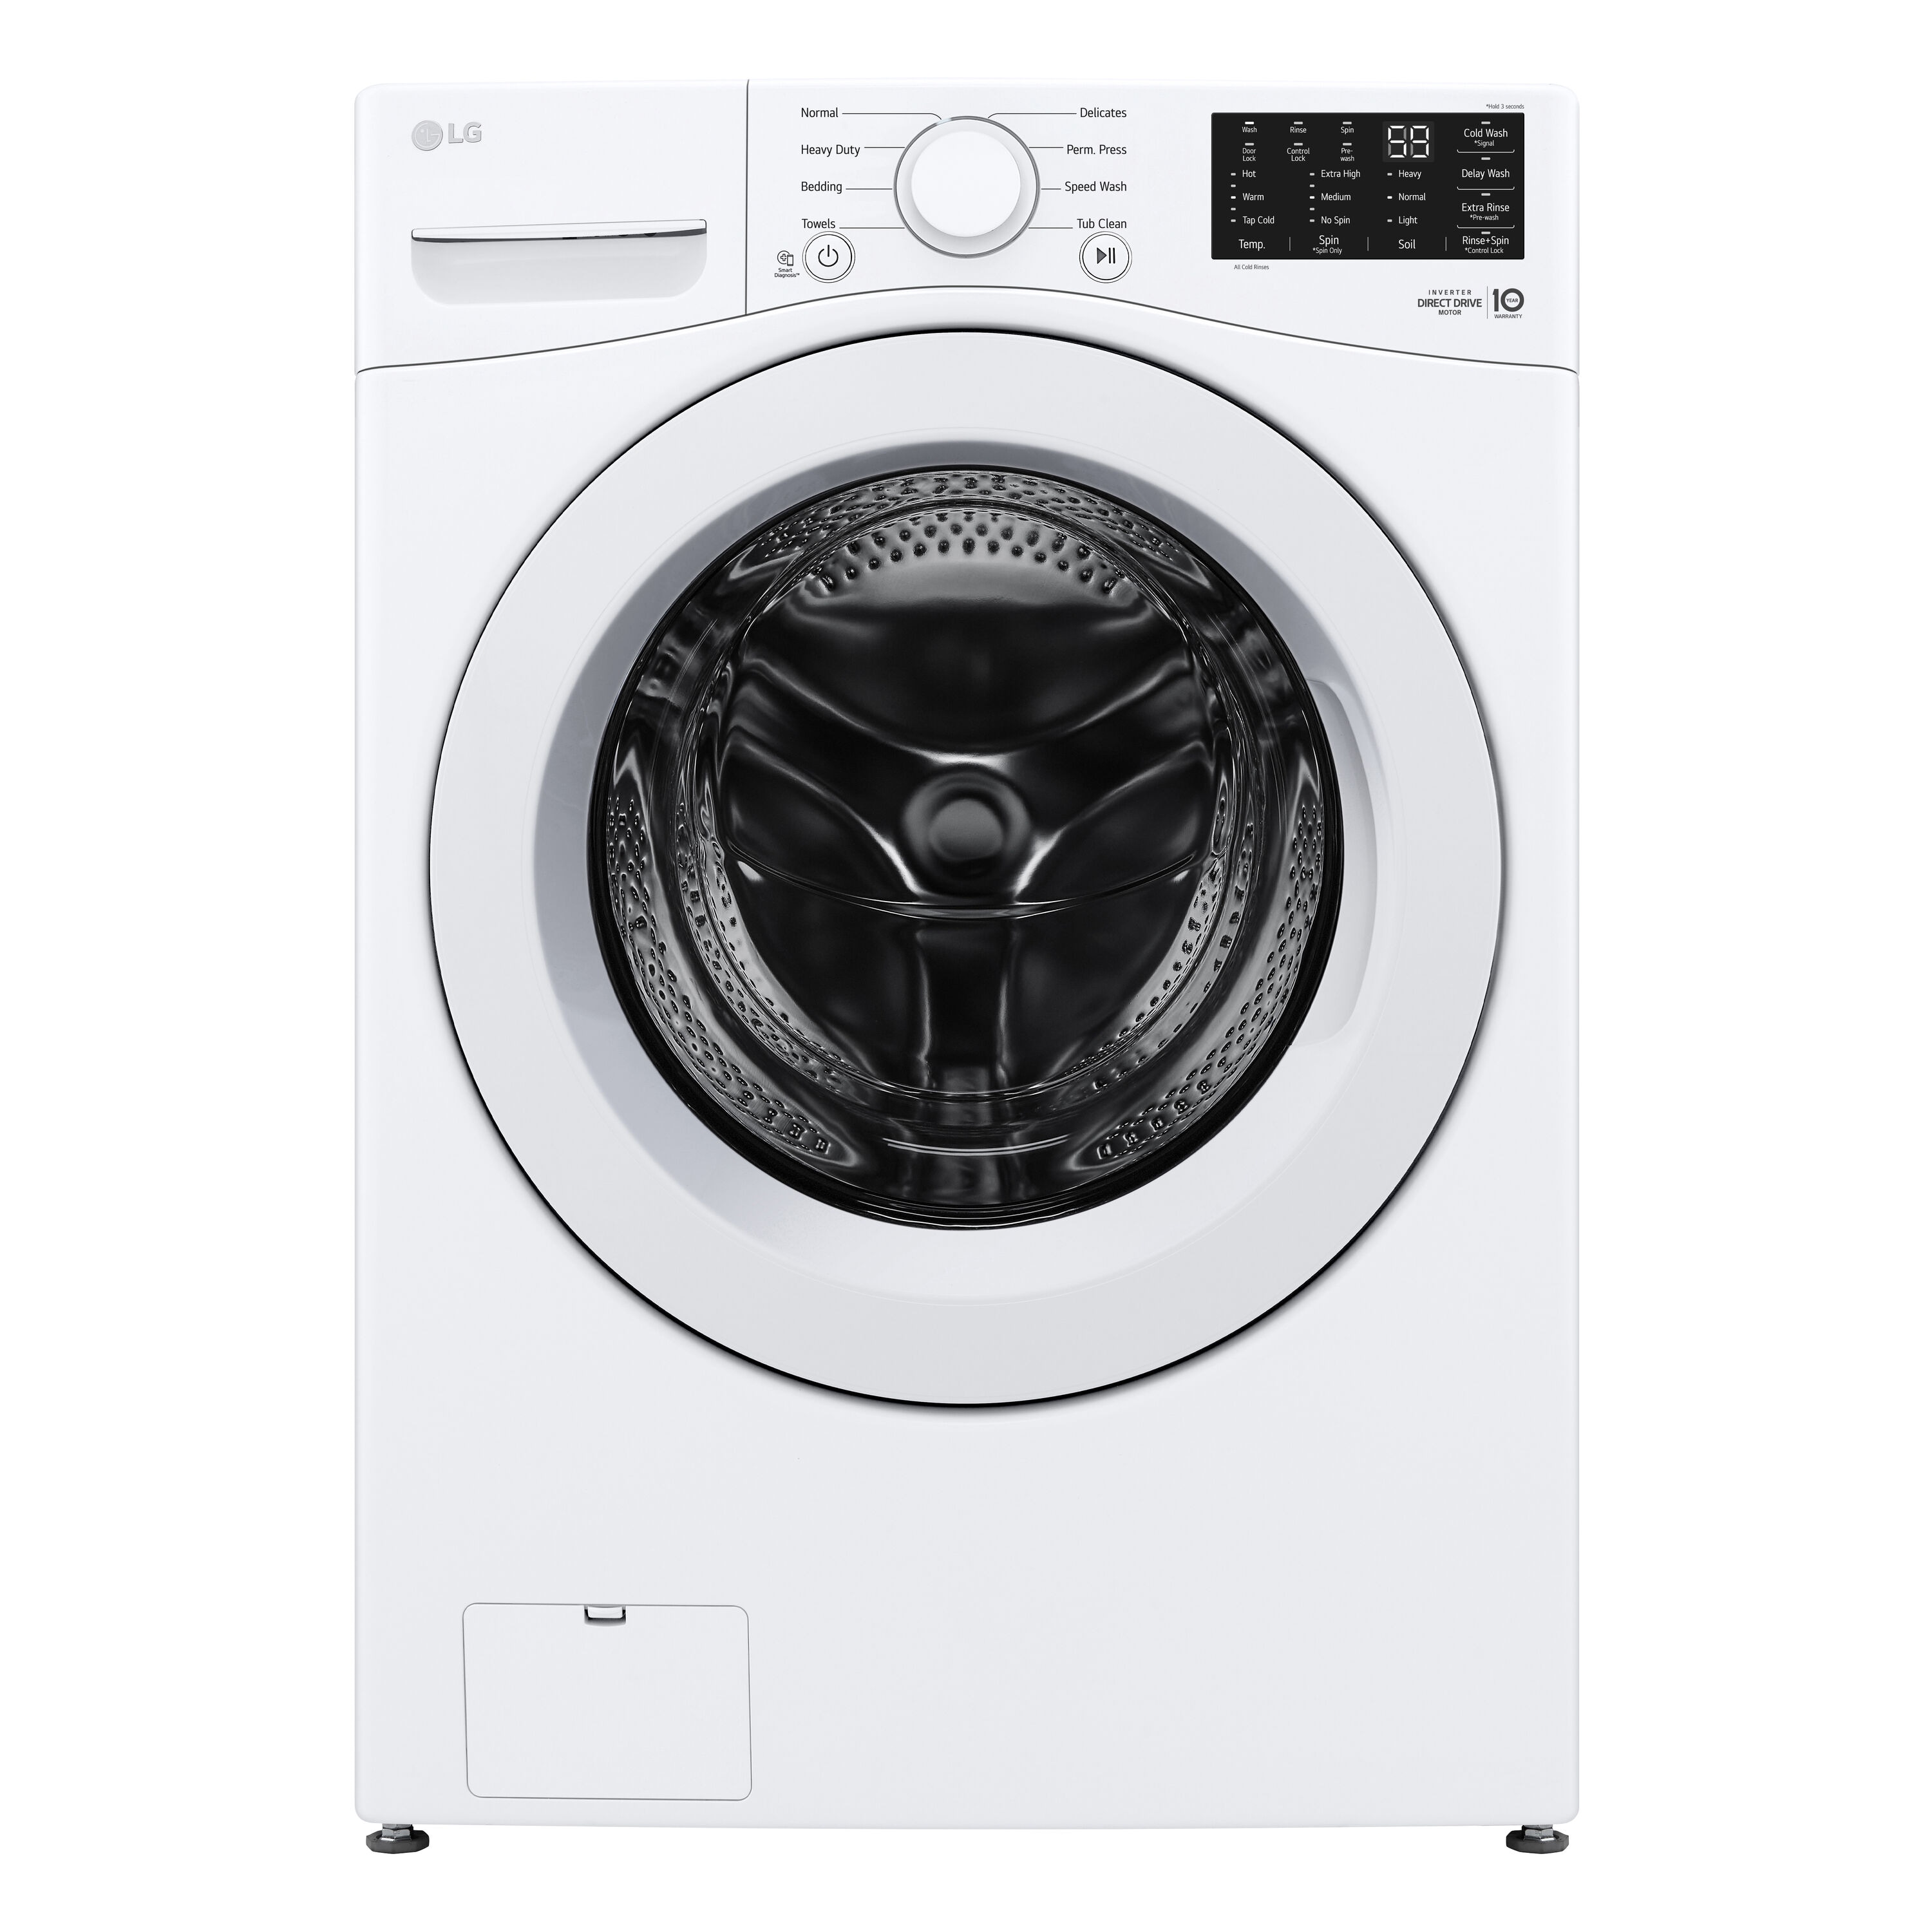 LG - 27 in. 4.8 cu. ft. Mega Capacity White Top Load Washer